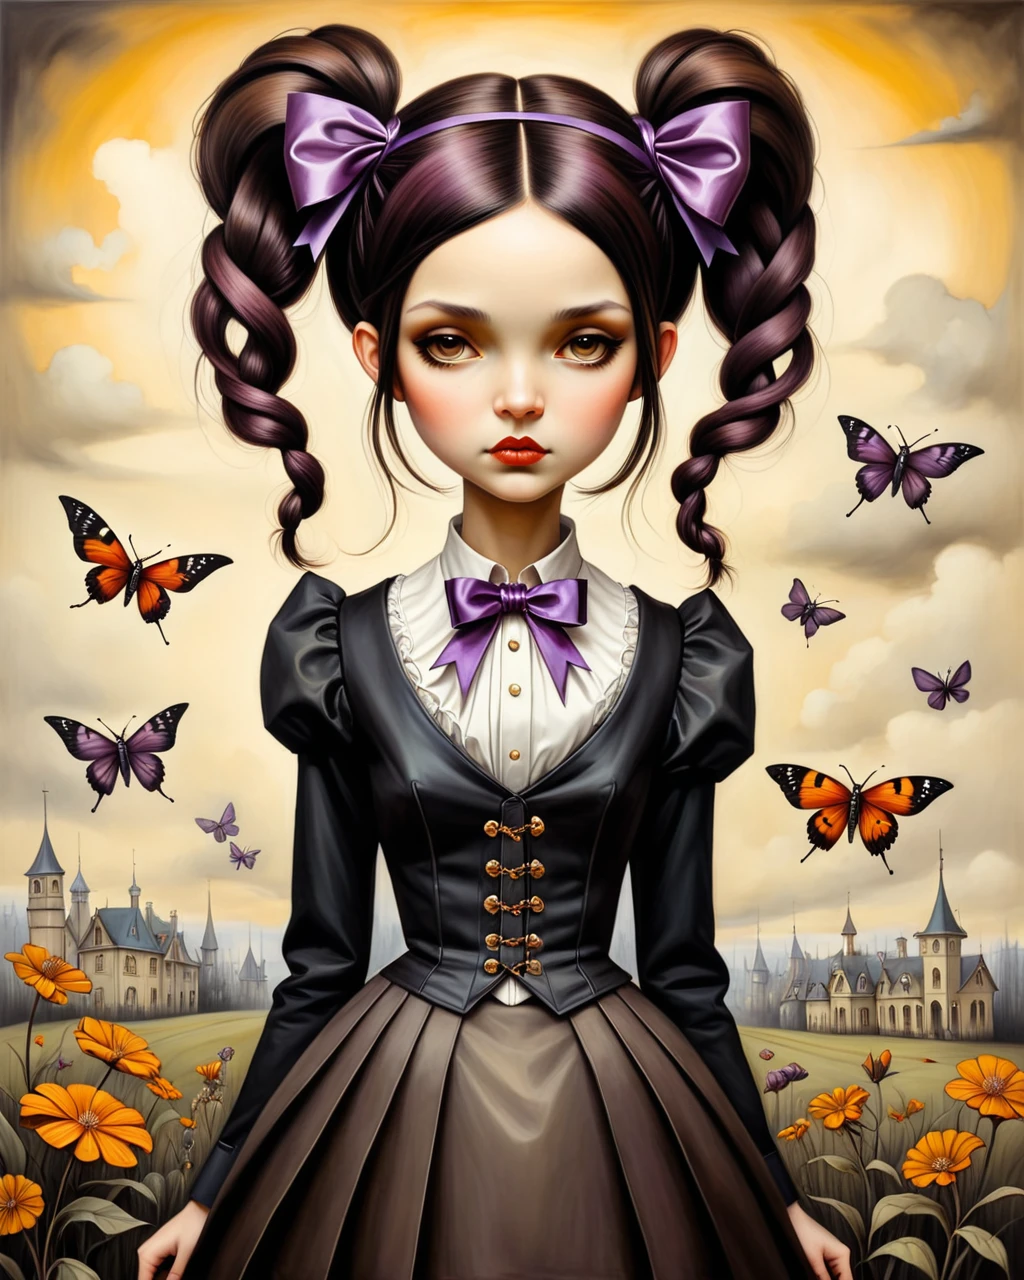 VIOLET BAUDELAIRE LEMONY SNICKET A SERIES OF UNFORTUNATE EVENTS GIRL WITH LONG BROWN HAIR PURPLE RIBBON BLUNT BANGS EDWARDIAN VICTORIAN GOTHIC STEAMPUNK INVENTOR origami style in the style of esao andrews,esao andrews style,esao andrews art,esao andrewsa painting of a girl gothic wednesday addams pale black hair two braids style of esao andrews, andrews esao artstyle, inspired by Esao Andrews, esao andrews ornate, by Esao Andrews, esao andrews, inspired by ESAO, by ESAO,  earley, shrubs and flowers esao andrews, benjamin lacombe, 1girl, bug in the style of esao andrews, esao andrews . paper art, pleated paper, folded, origami art, pleats, cut and fold, centered composition